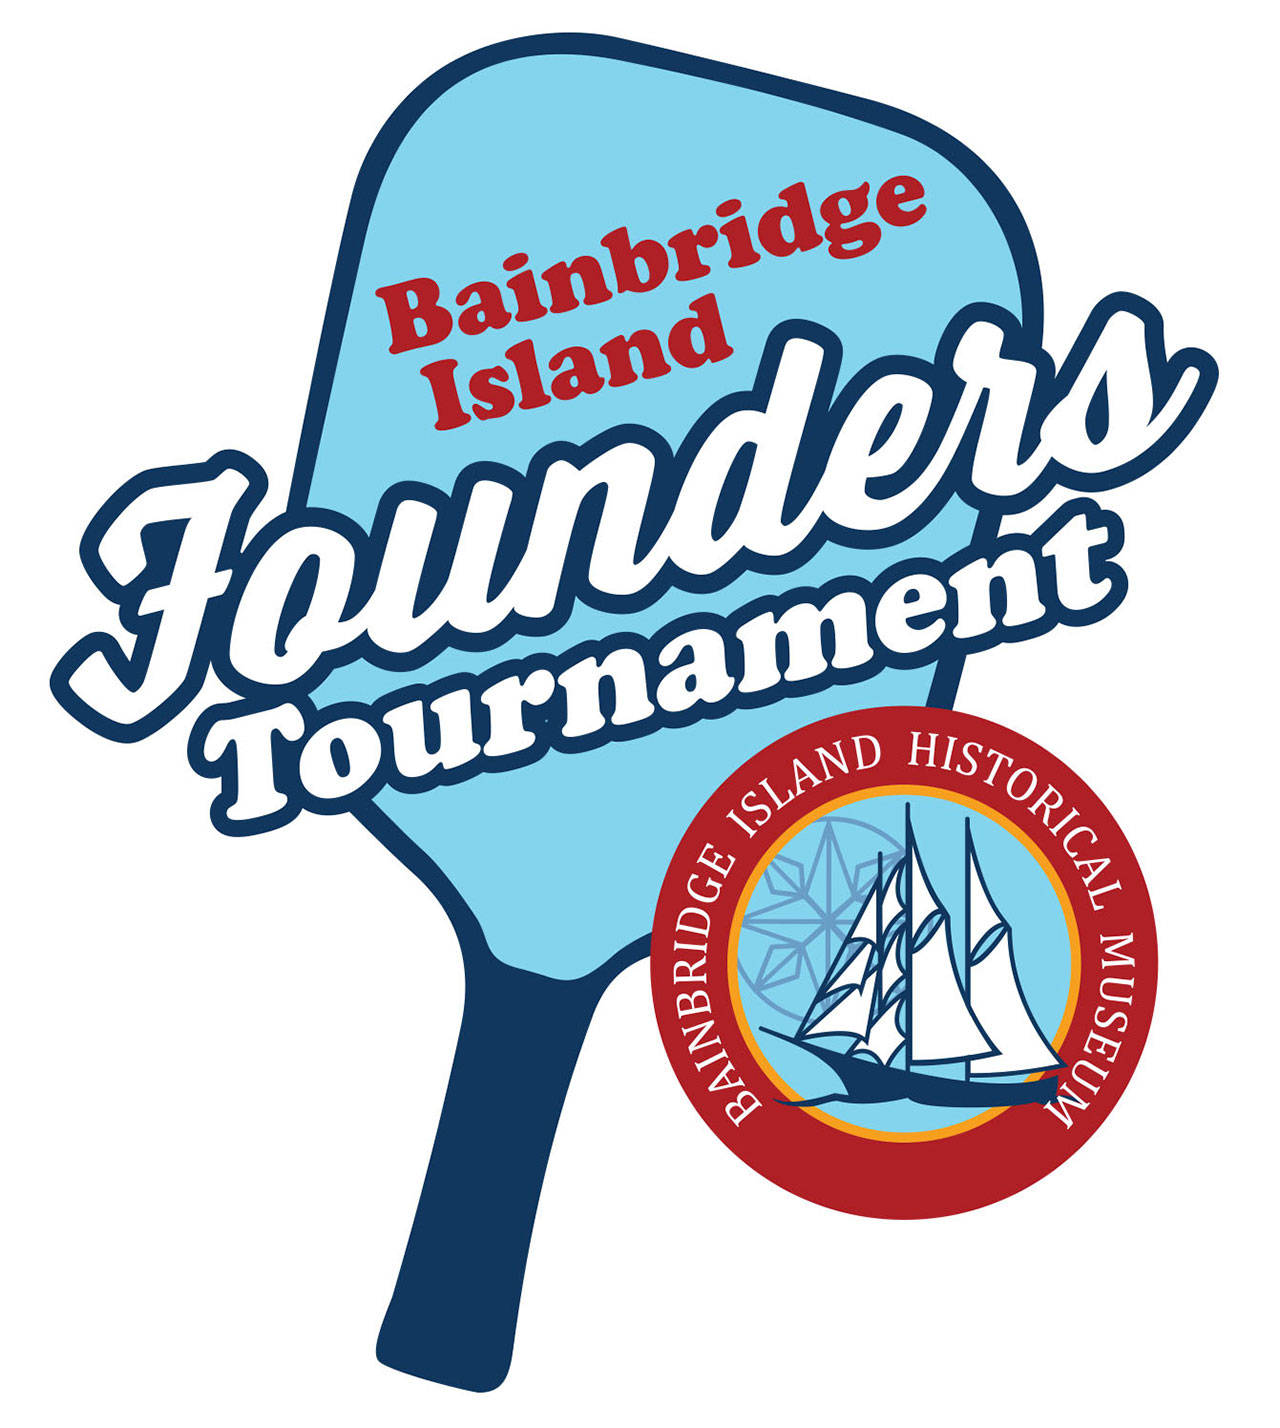 Image courtesy of the Bainbridge Island Historical Museum | A special pickleball tournament will be held in August, presented by the Bainbridge Island Historical Museum, and team registration is now open.